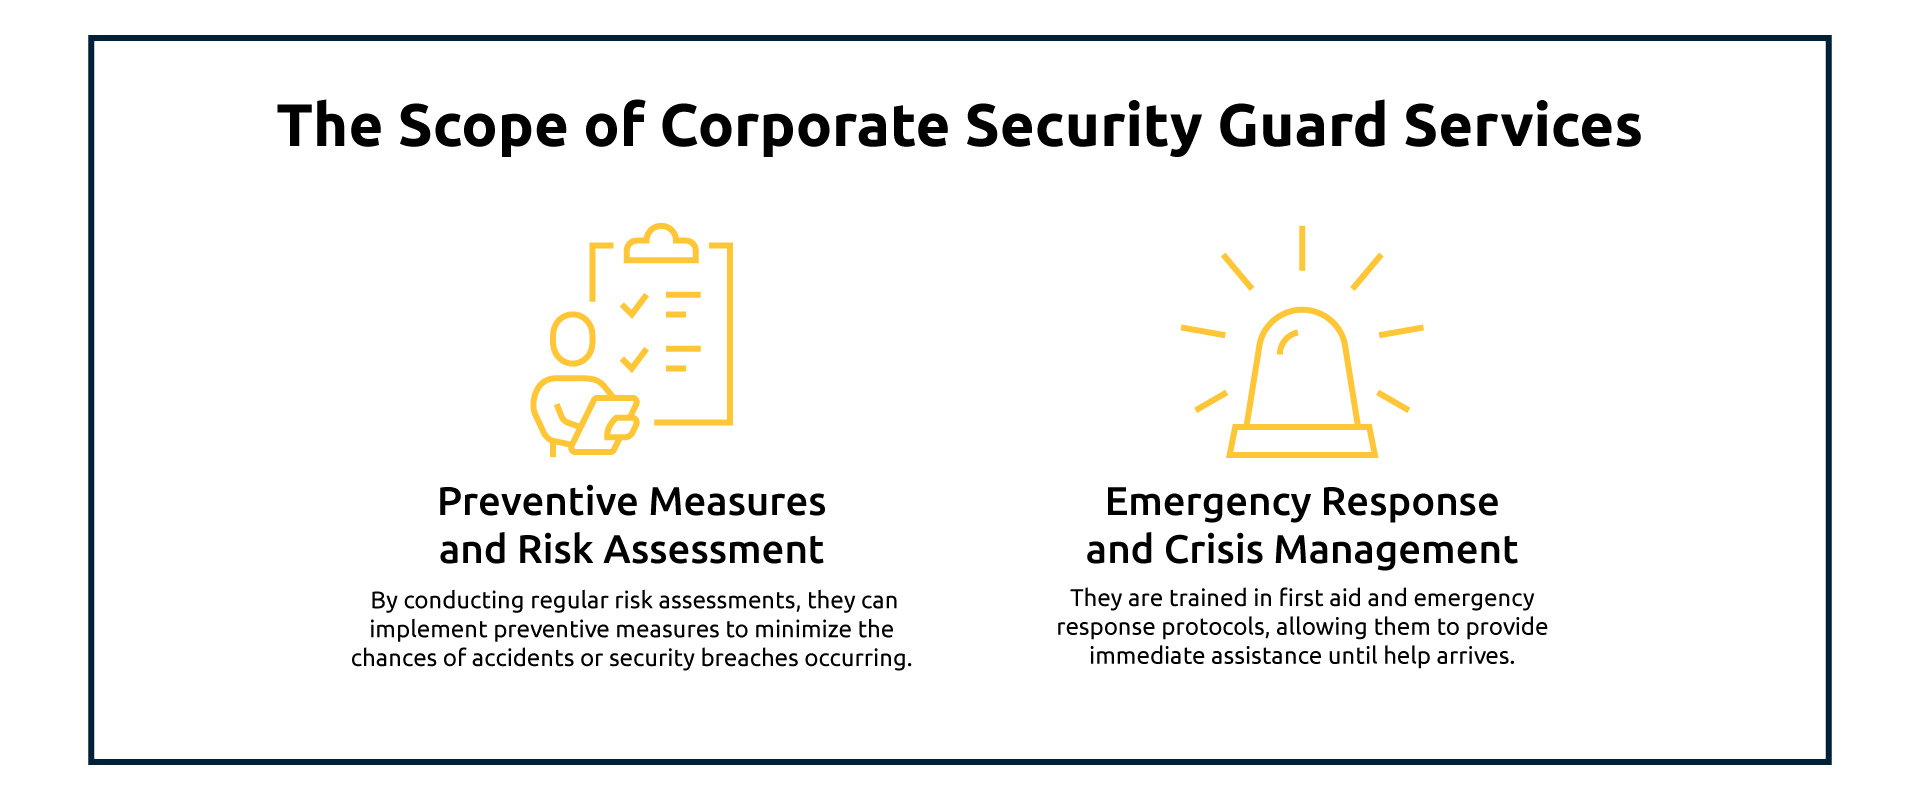 The Scope of Corporate Security Guard Services